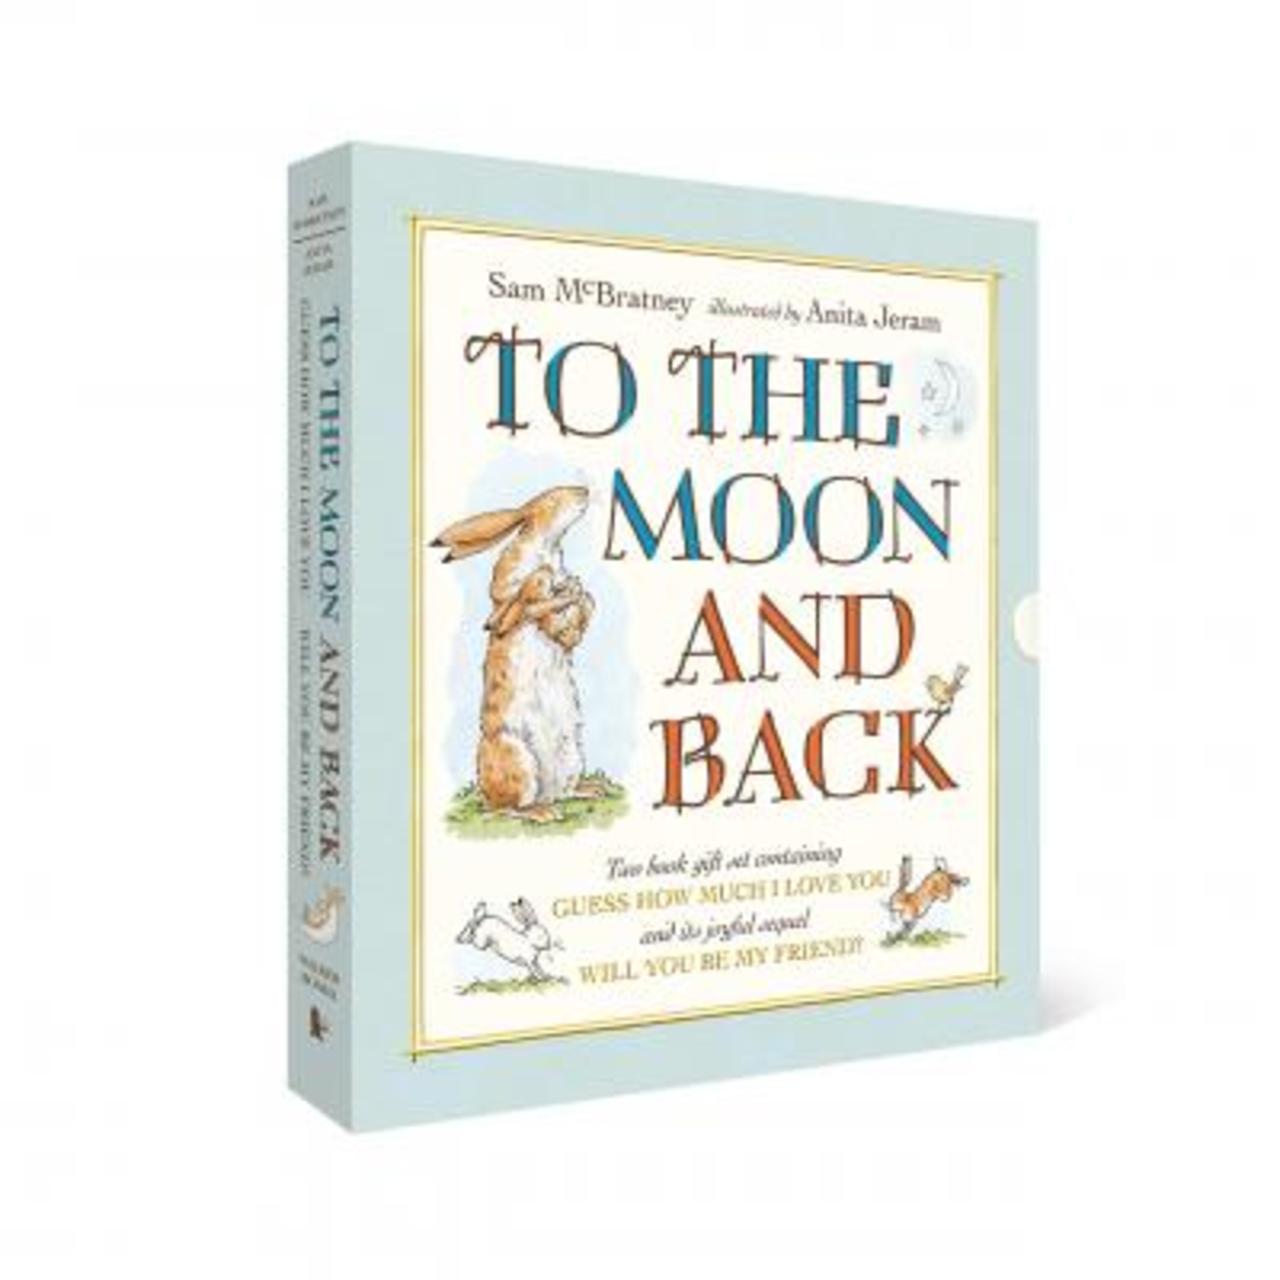 Hình ảnh Sách - To the Moon and Back: Guess How Much I Love You and Will You by Sam McBratney Anita Jeram (UK edition, hardcover)